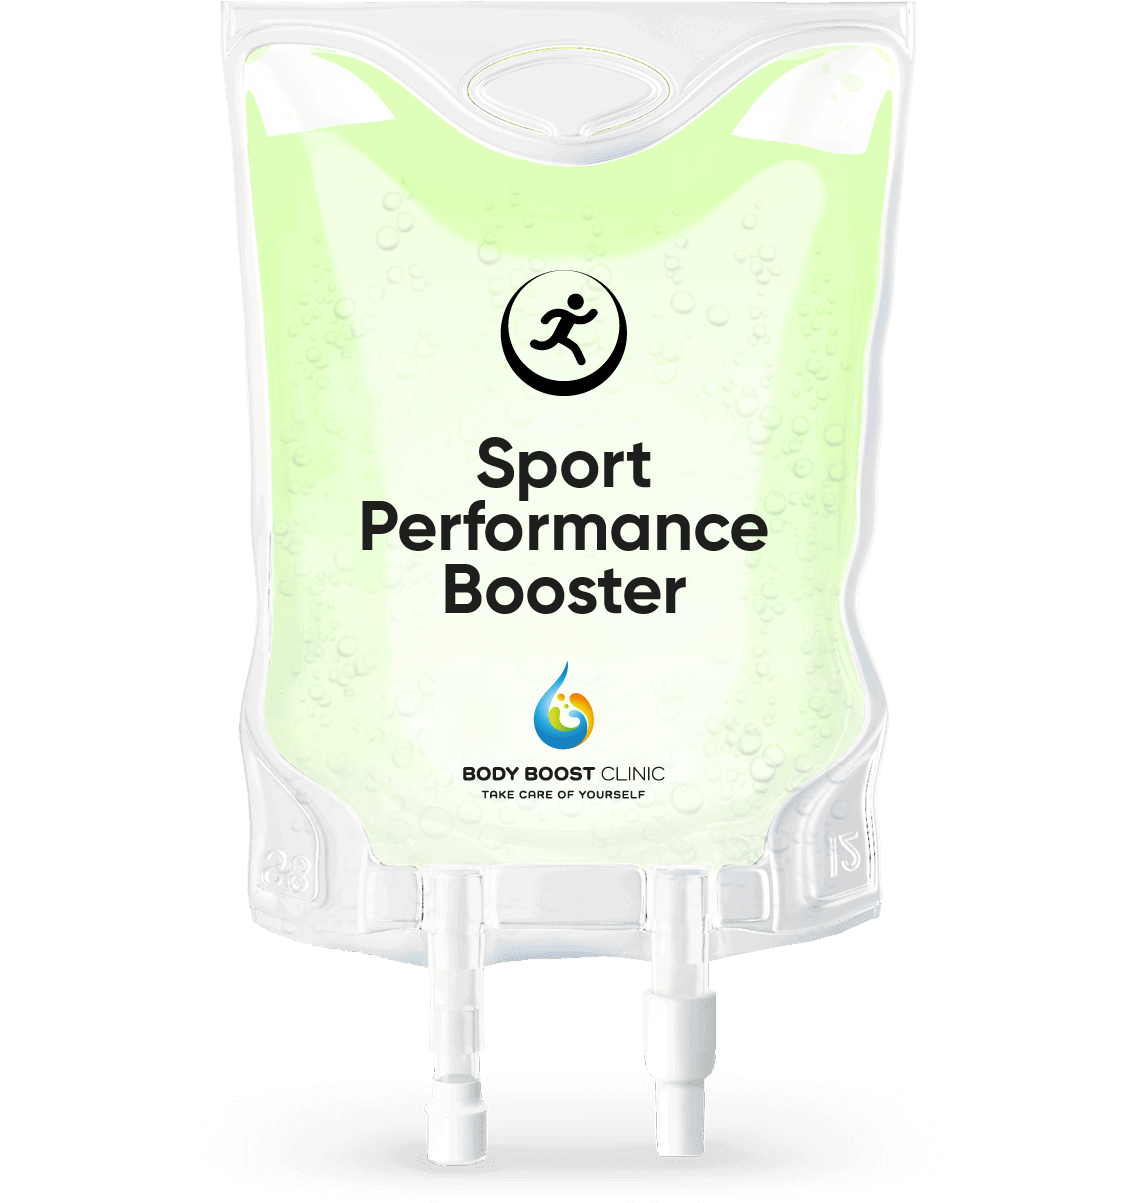 Body Boost Clinic Hull - Vitamin IV drip to perform better than sportsmen in UK